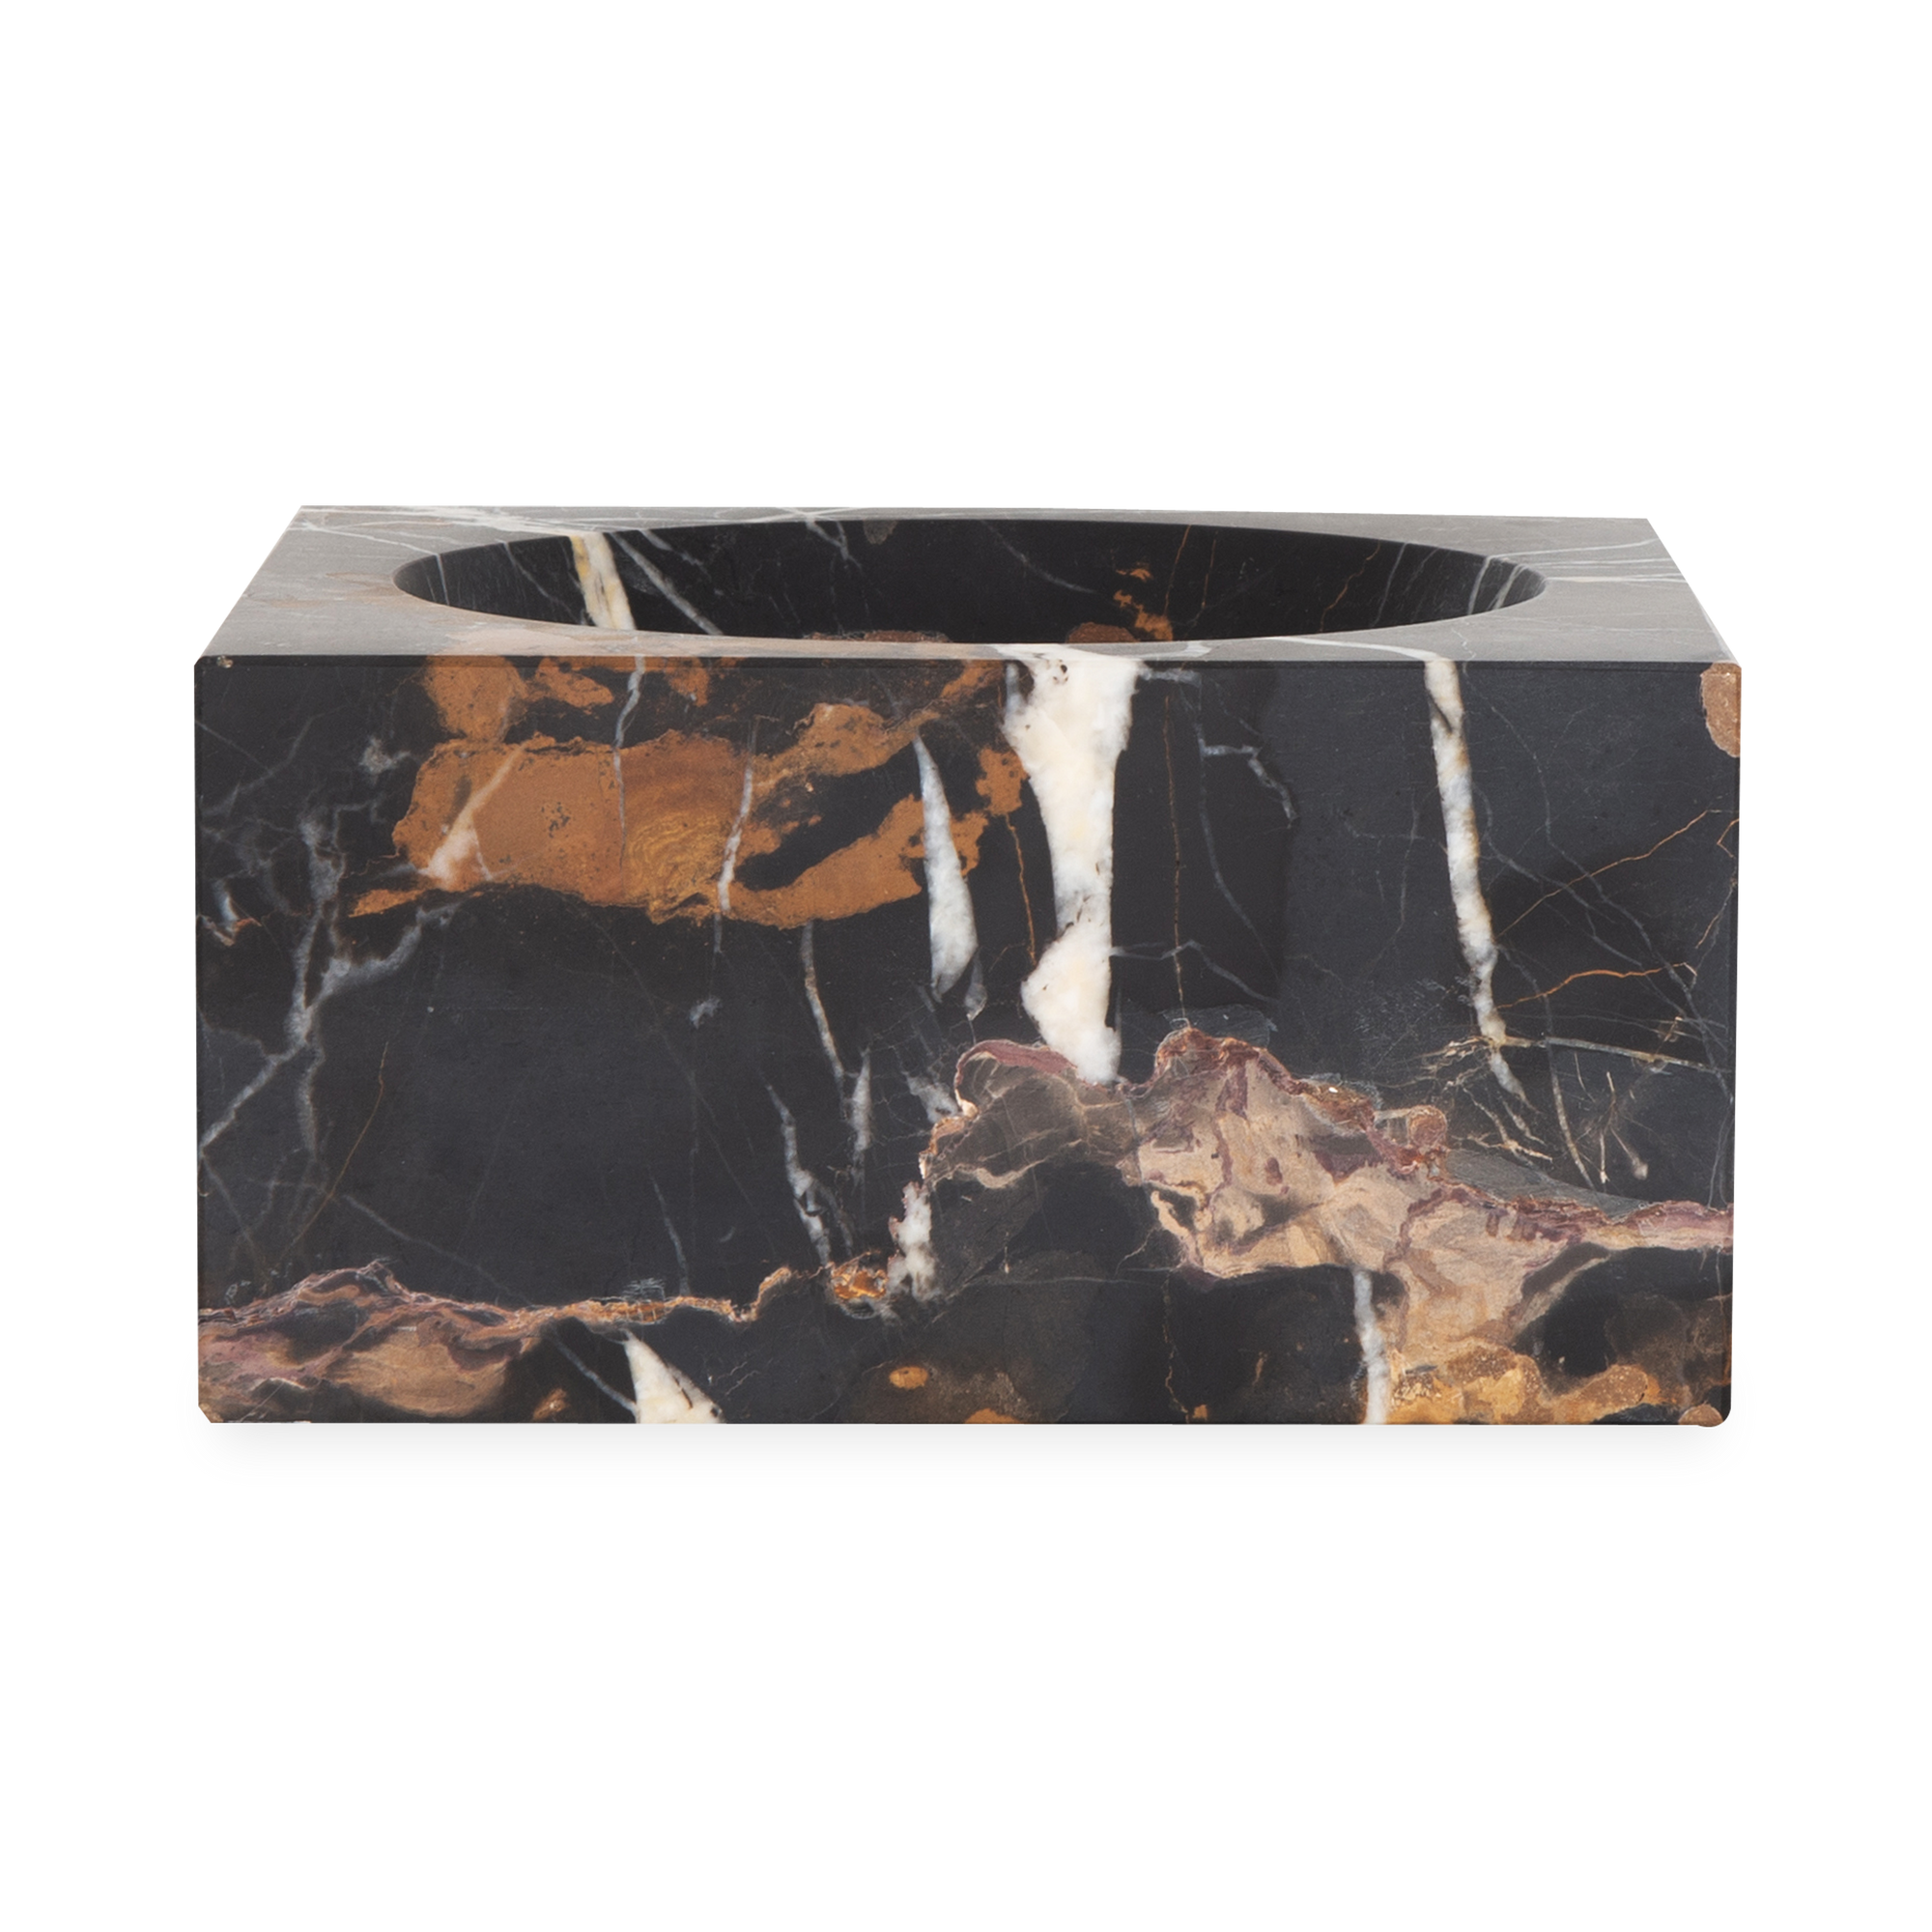 Providing luxurious and confidently stable elements, this captivating bowl is made with black marble with a touch of white and gold veining.